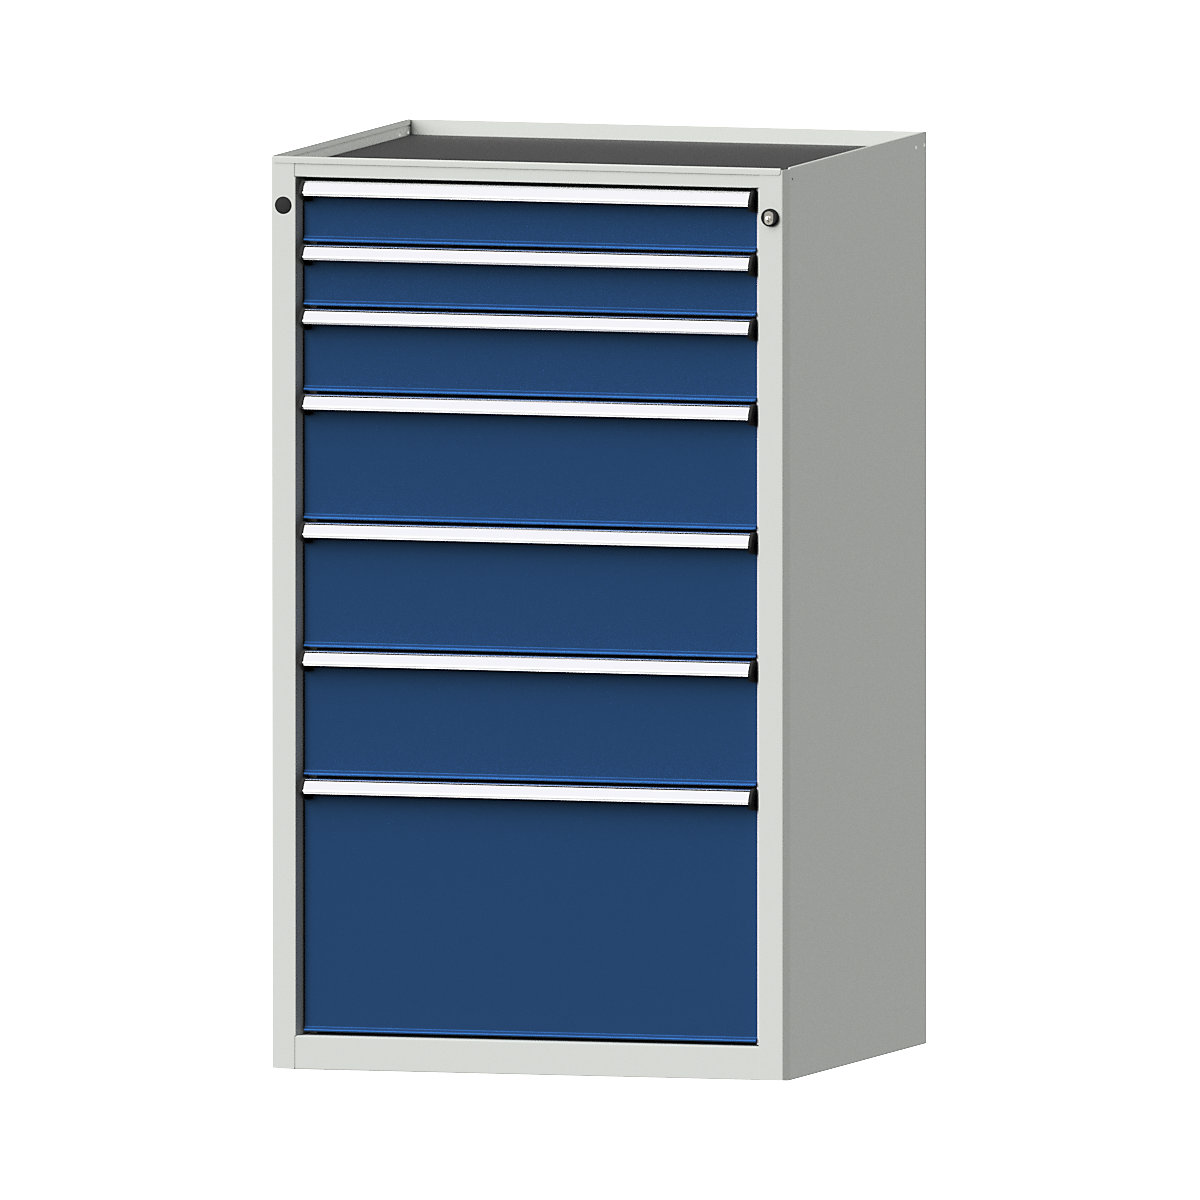 Drawer cupboard – ANKE, WxD 760 x 675 mm, 7 drawers, height 1280 mm, front in gentian blue-14